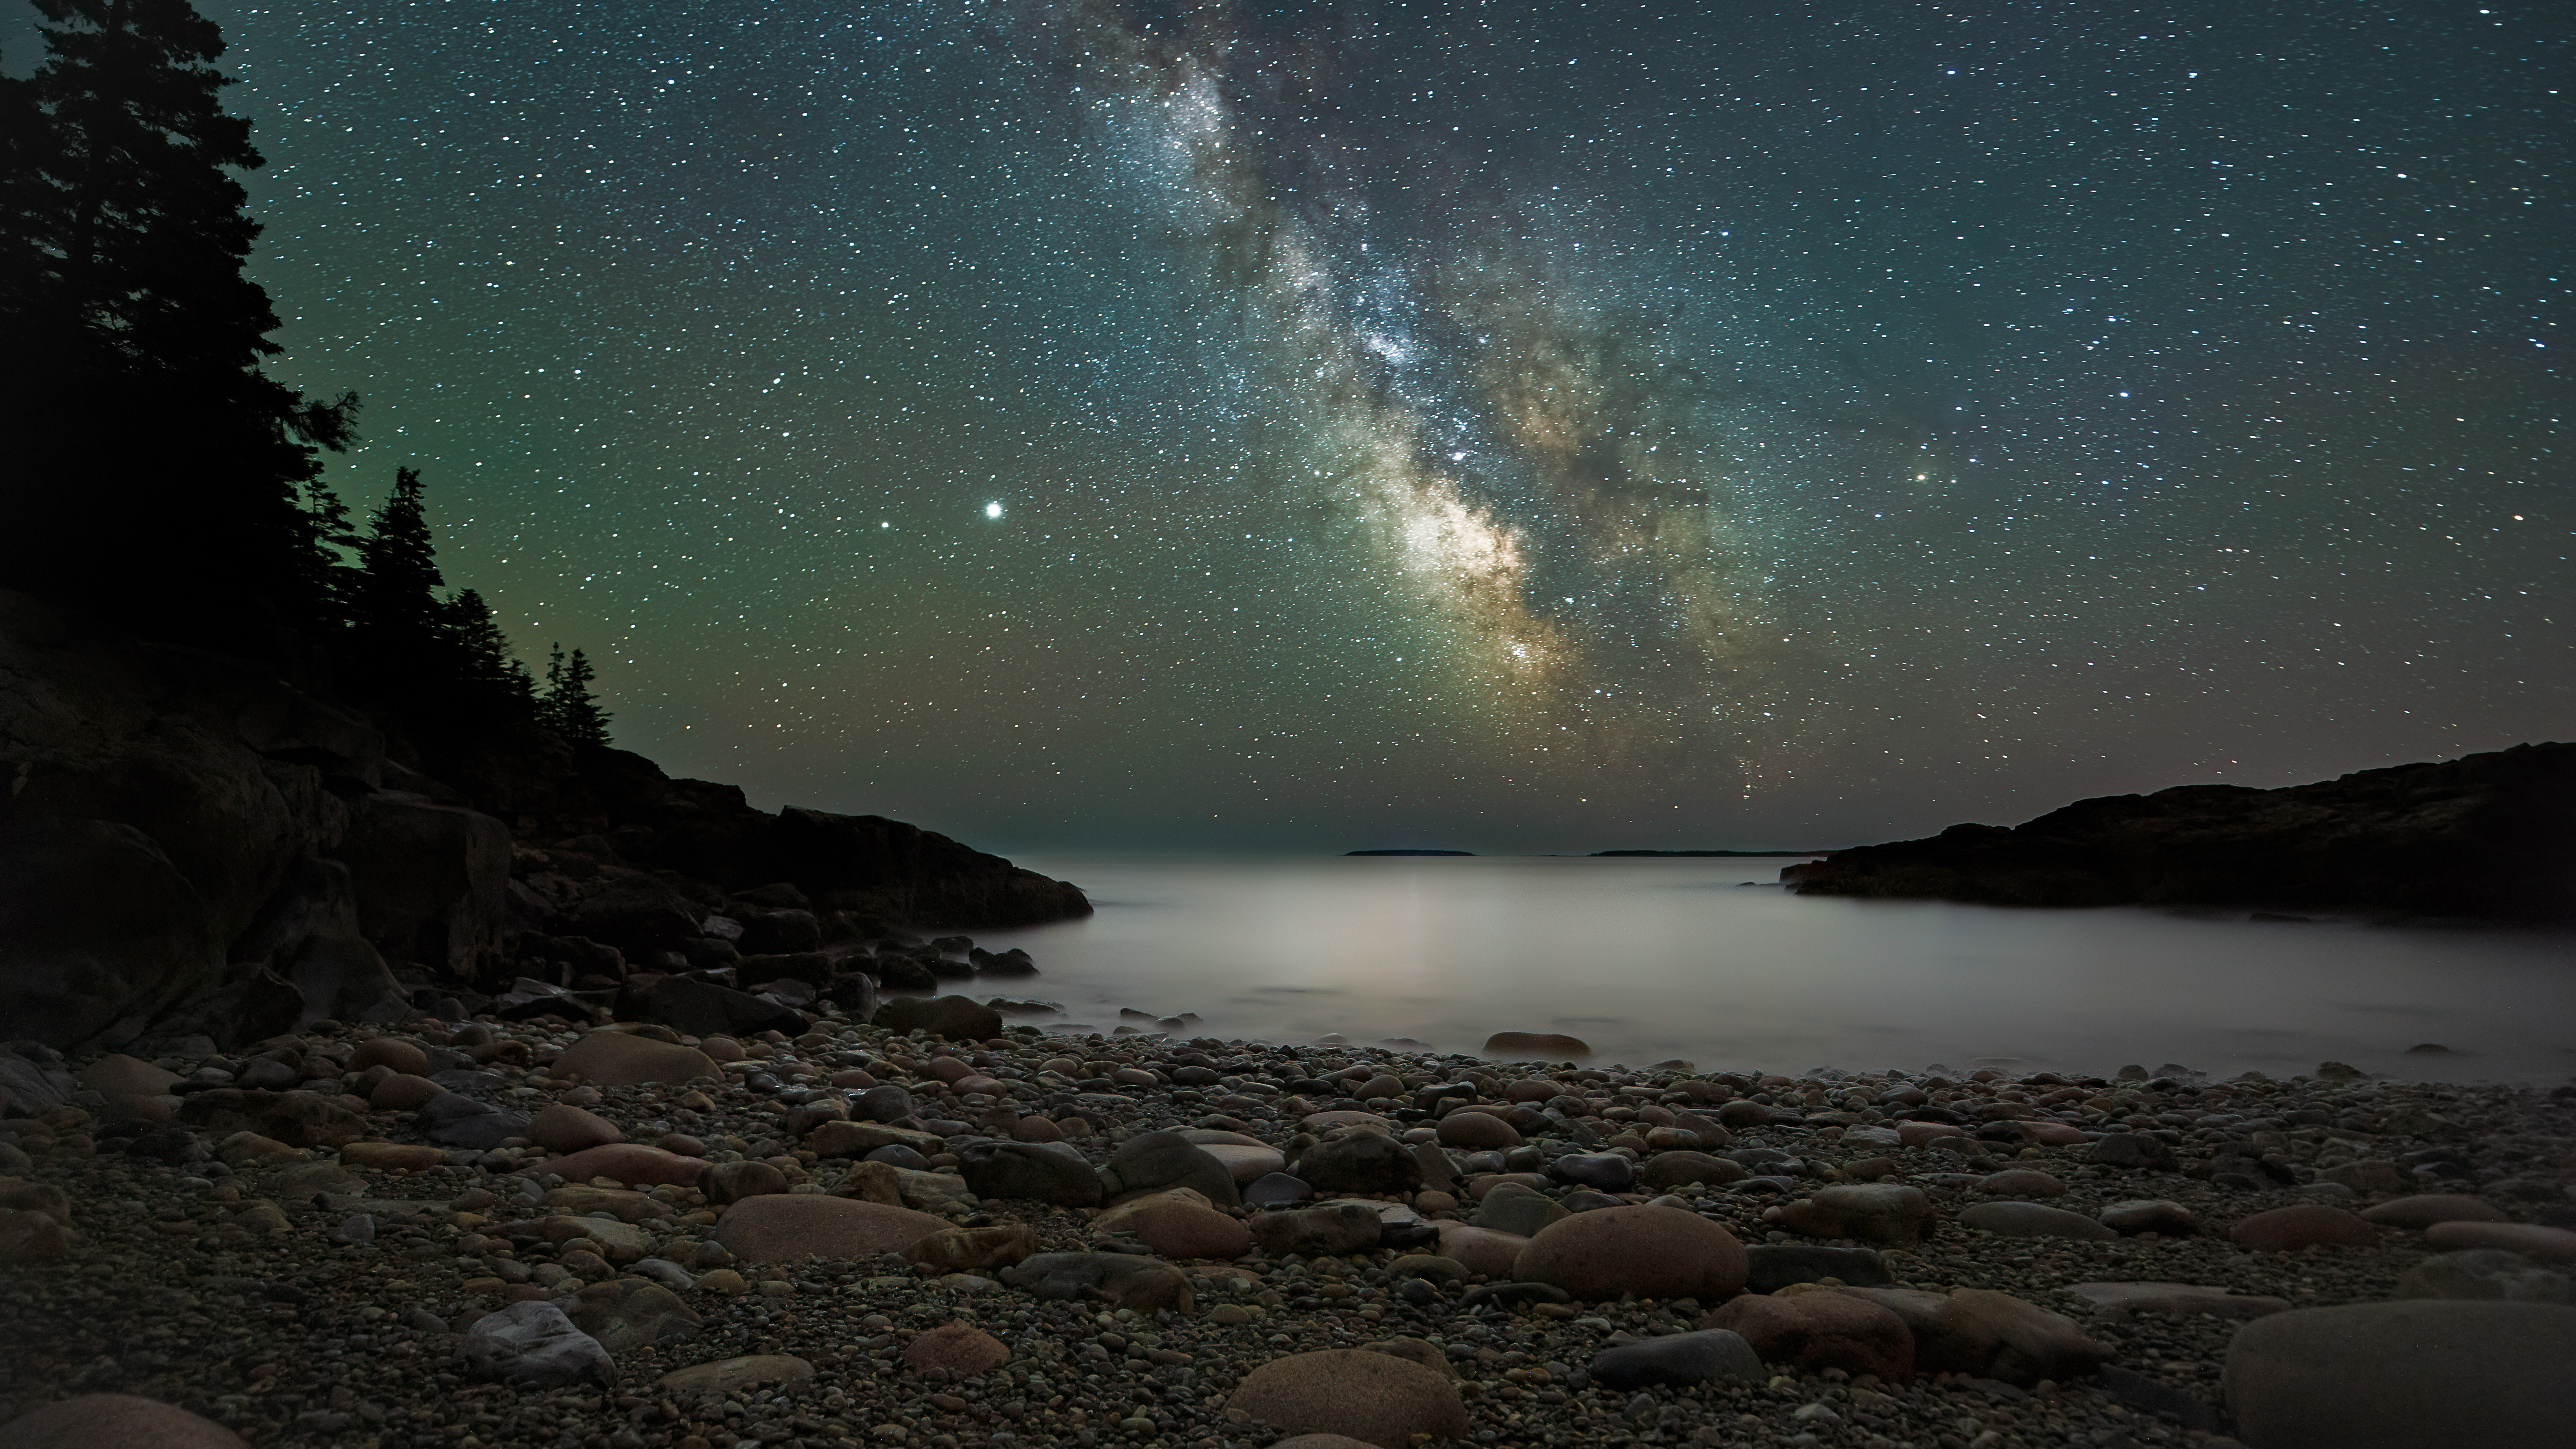 Milky Way over Acadia National Park, Maine by Harry Collins